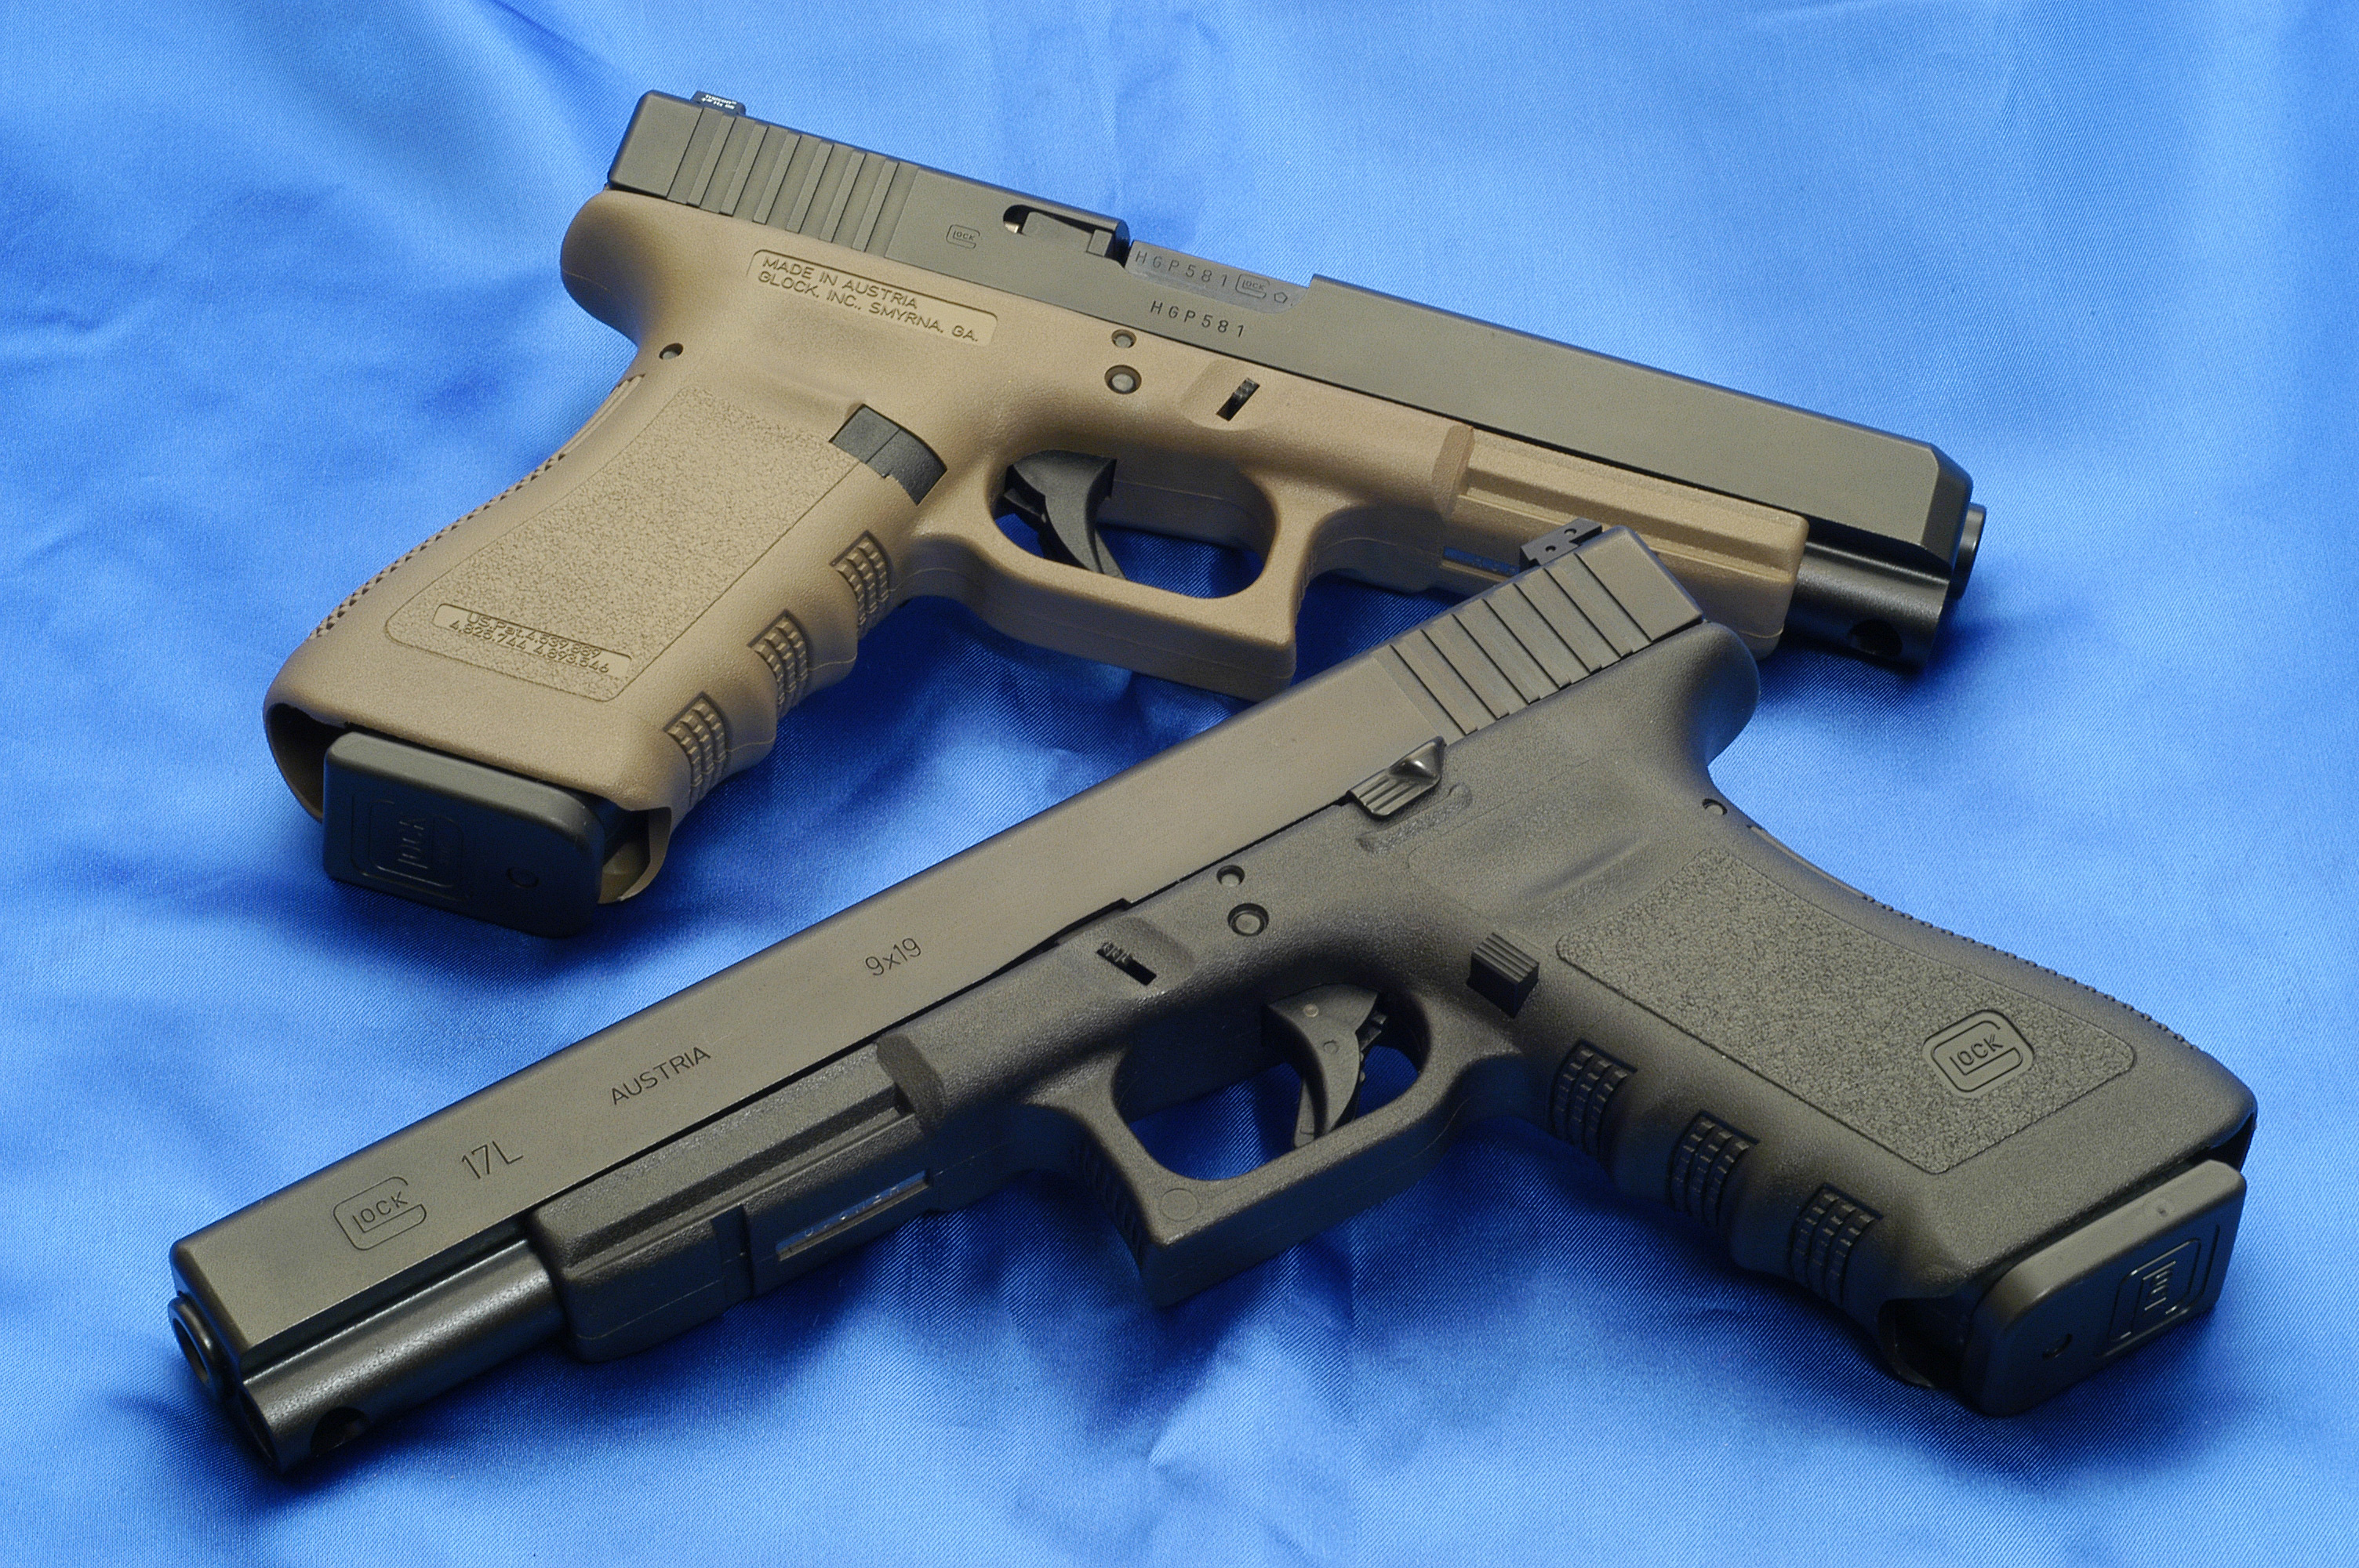 Glock 17L and 34.